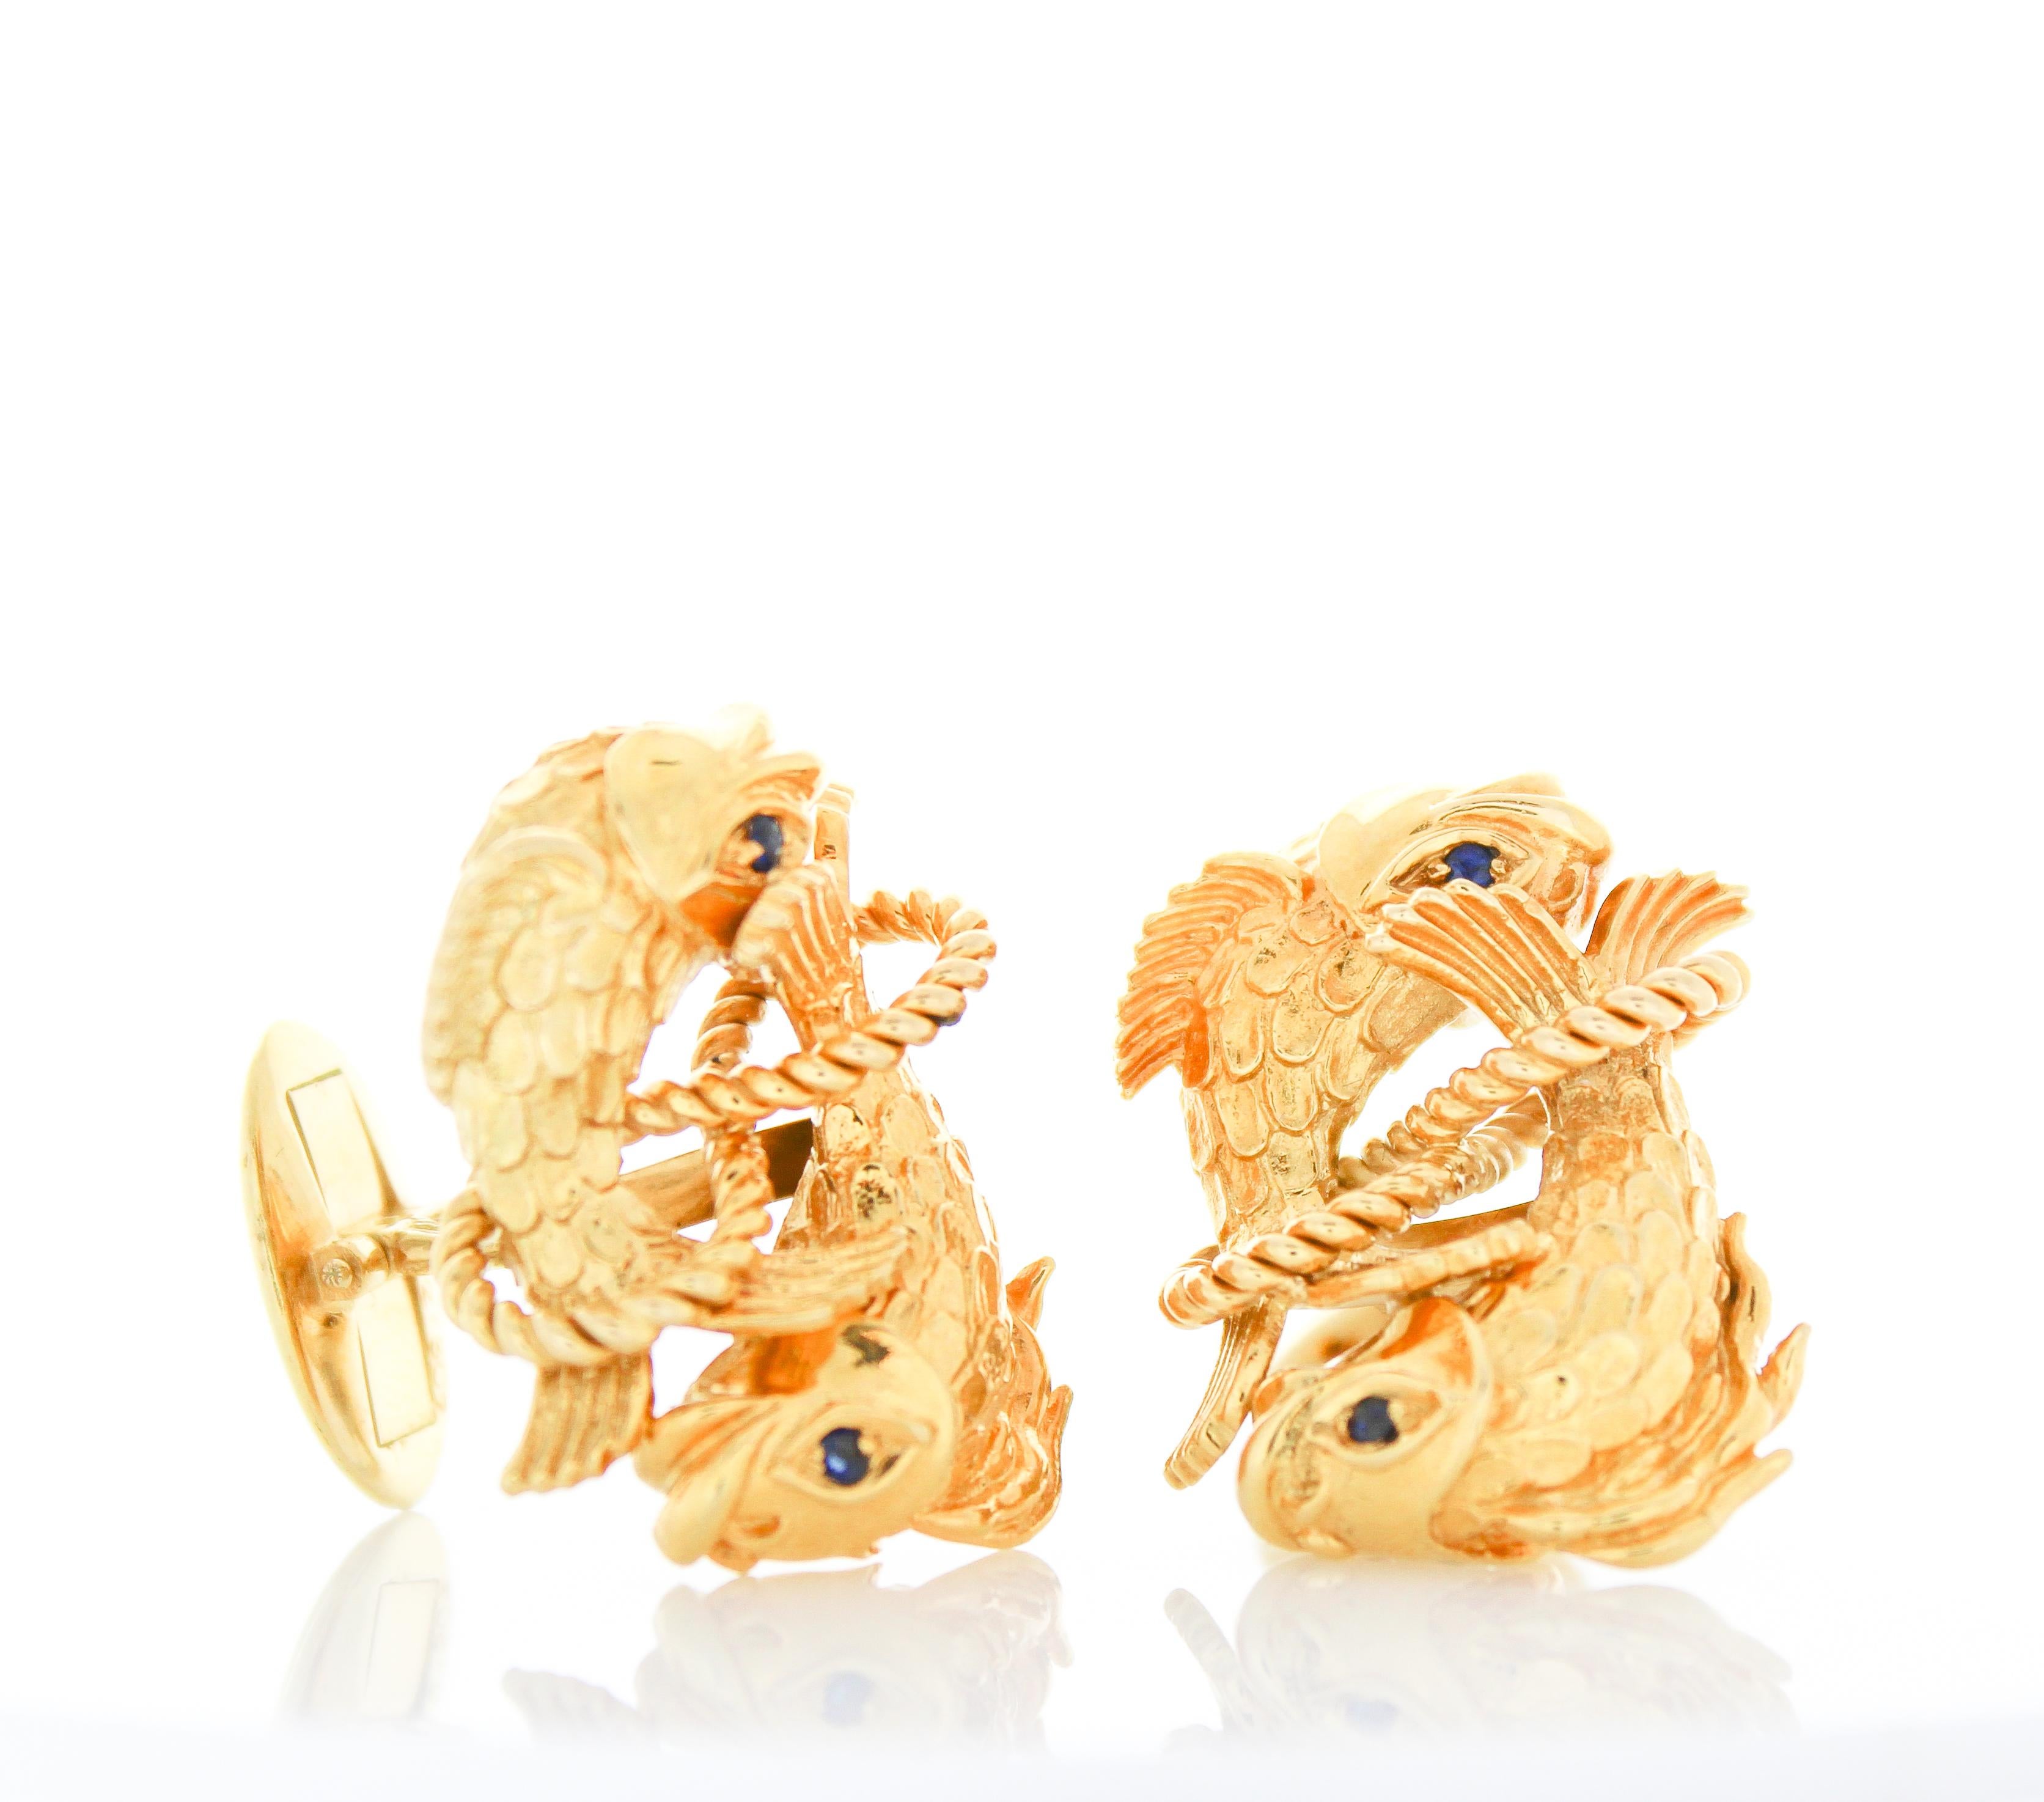 Add a touch of sophistication to your professional or formal attire with these one-of-a-kind cufflinks. These brightly polished 18k yellow gold cufflinks feature sapphires prong set in the rich gold sparkling with intense color. These handsome